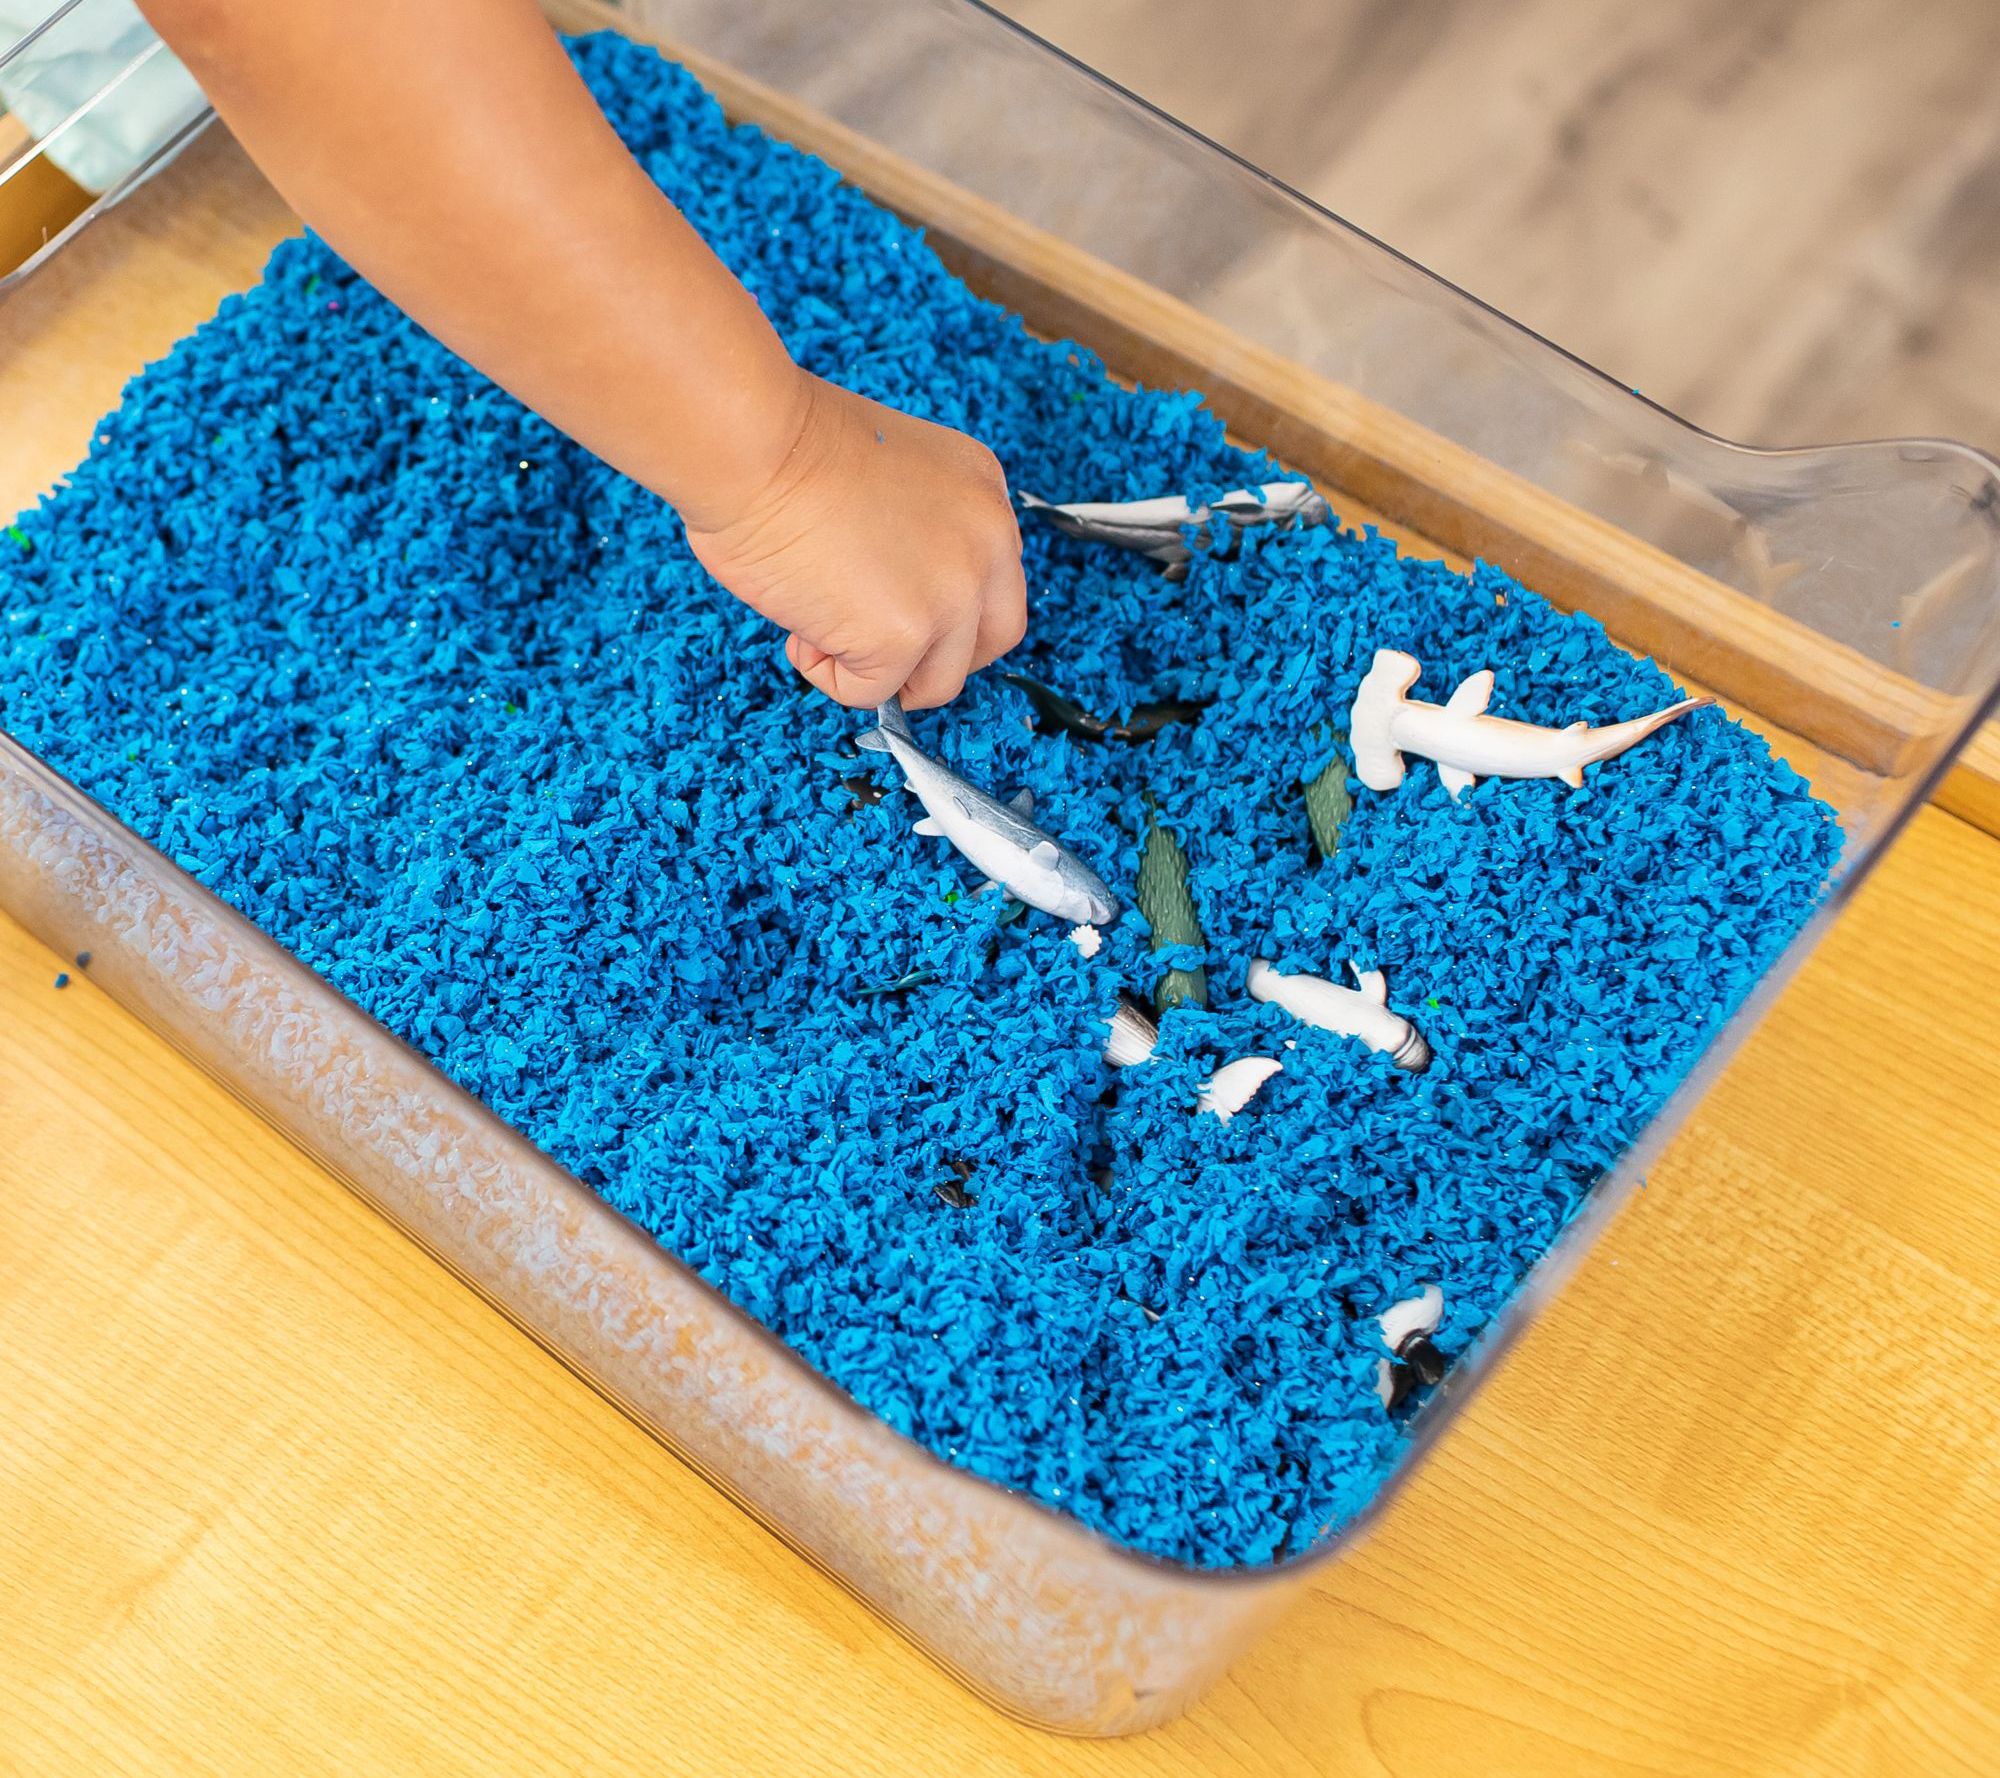 Playfoam is wonderfully sensory game material that does not dry out